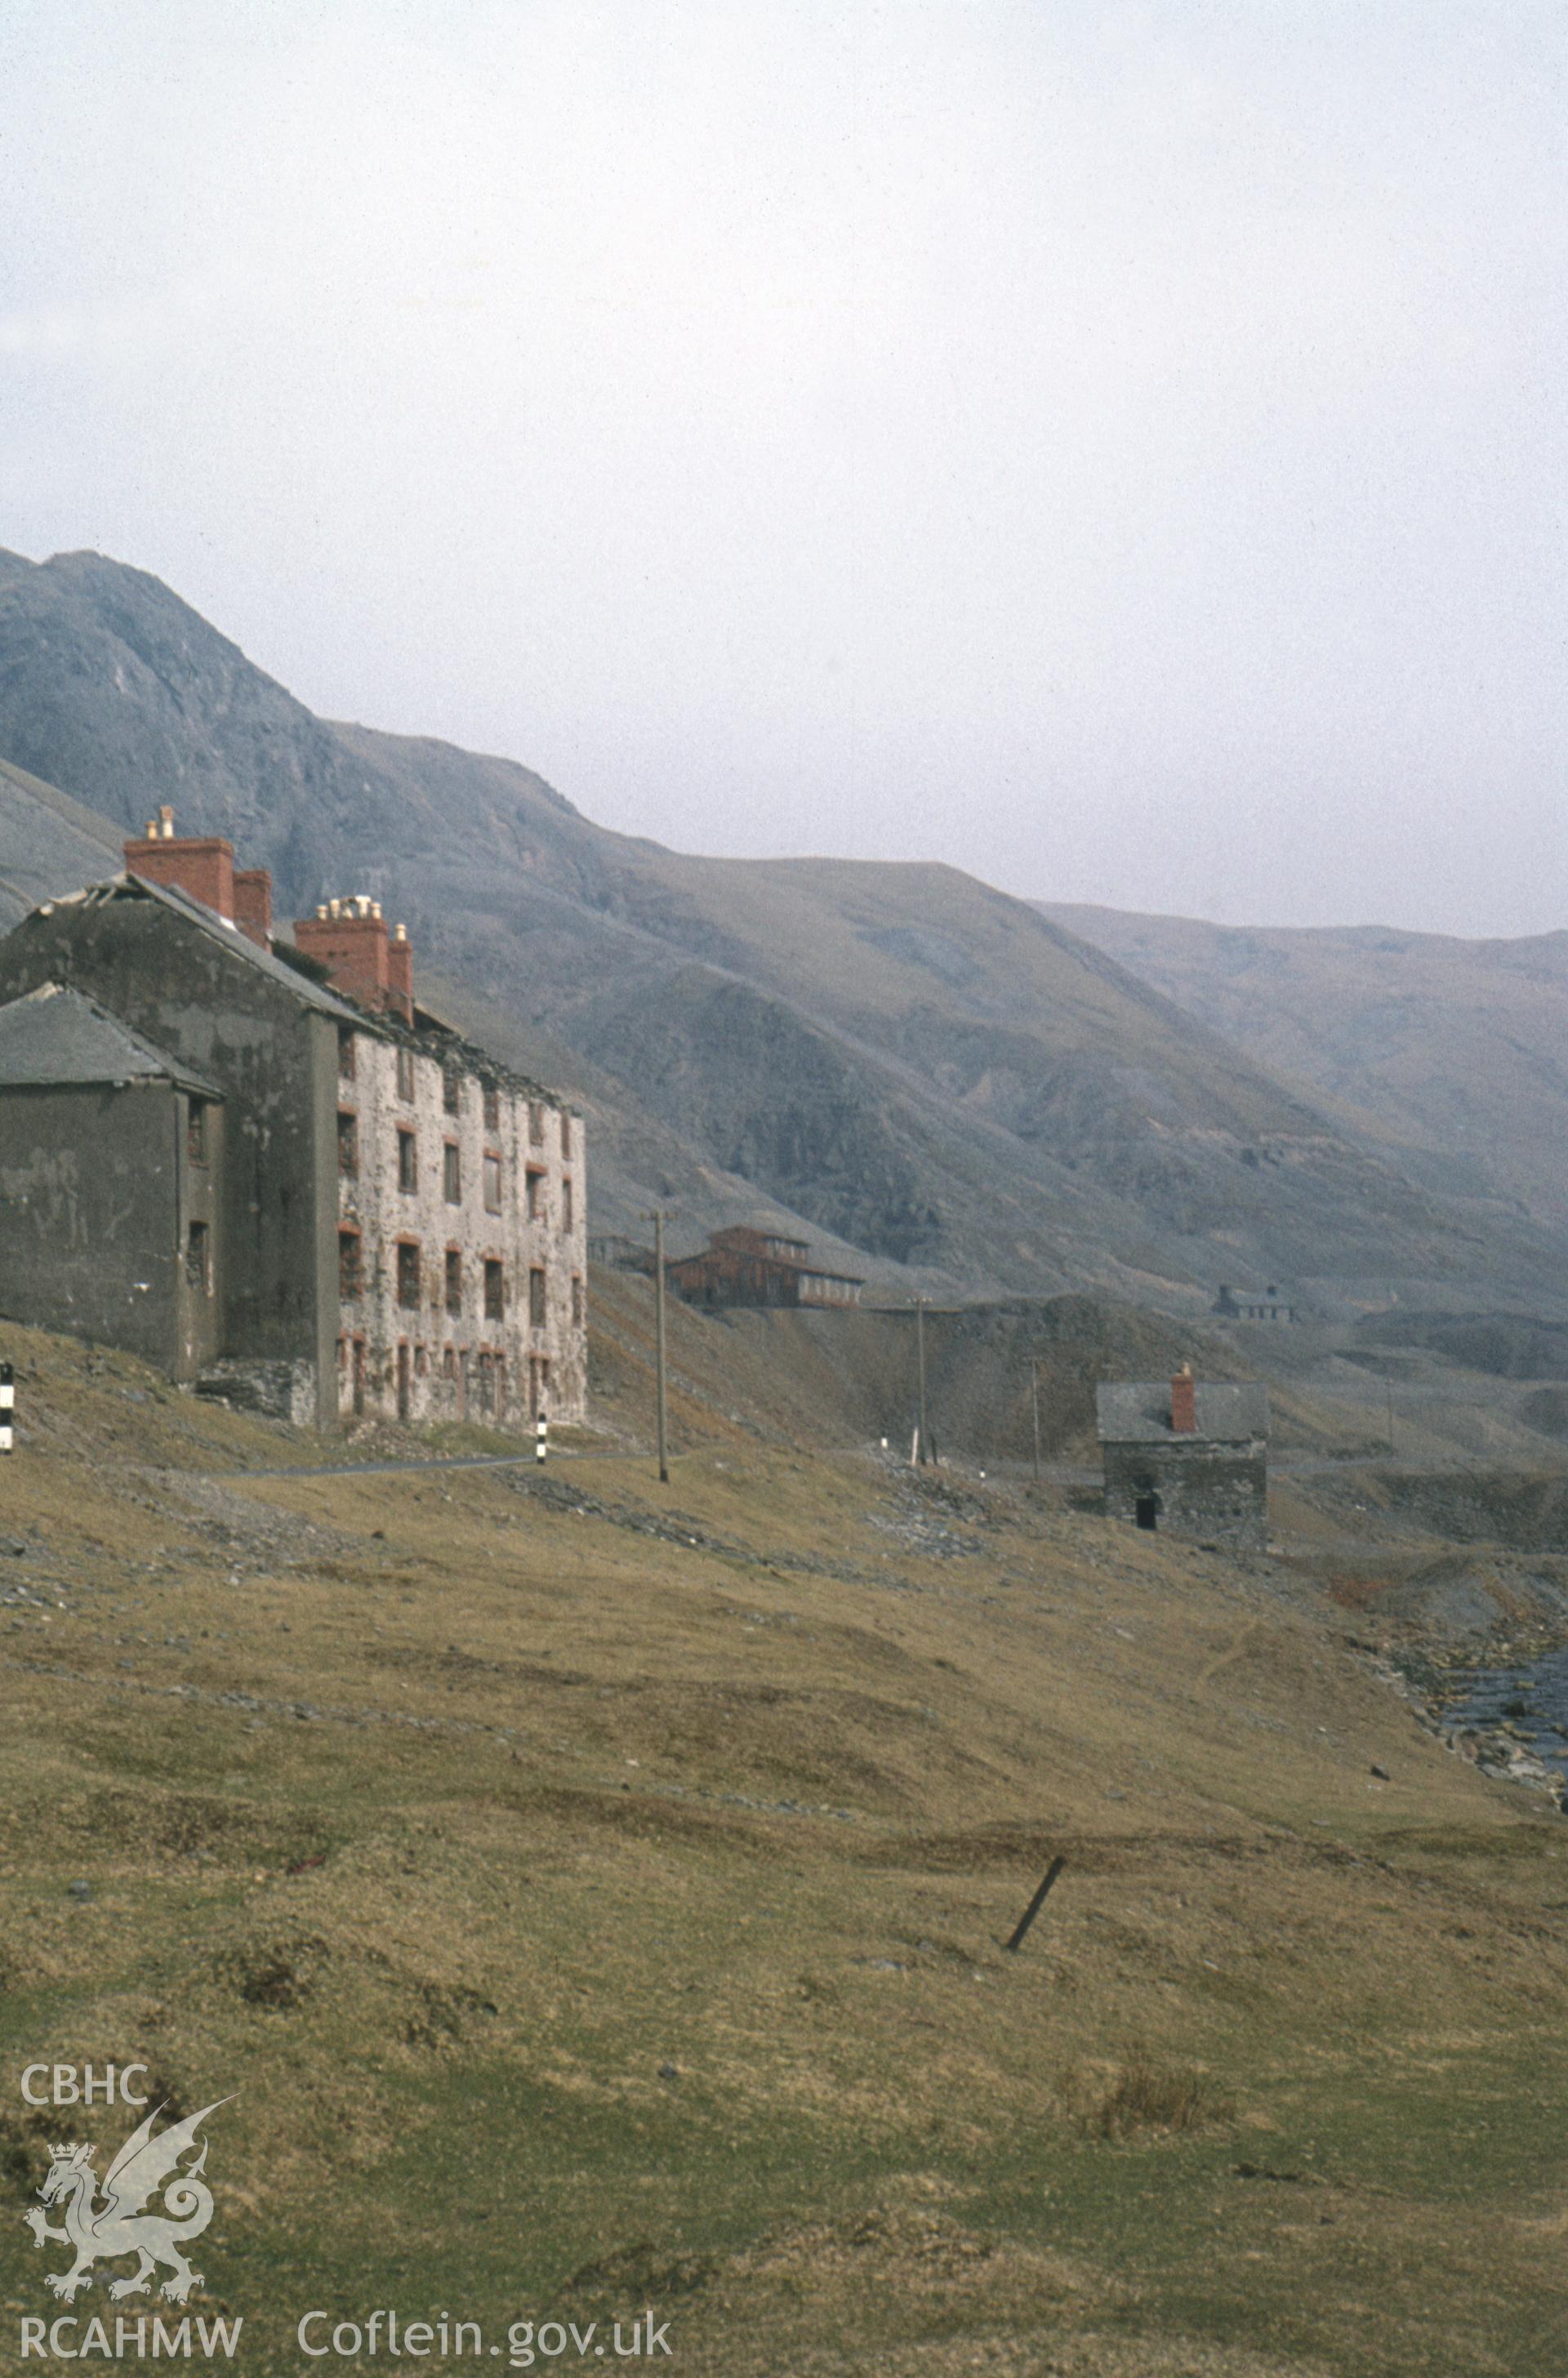 Digital copy of a colour slide produced by Stephen Hughes and dated 1974, showing a view of Barracks at Cwmystwyth Lead Mine Complex.